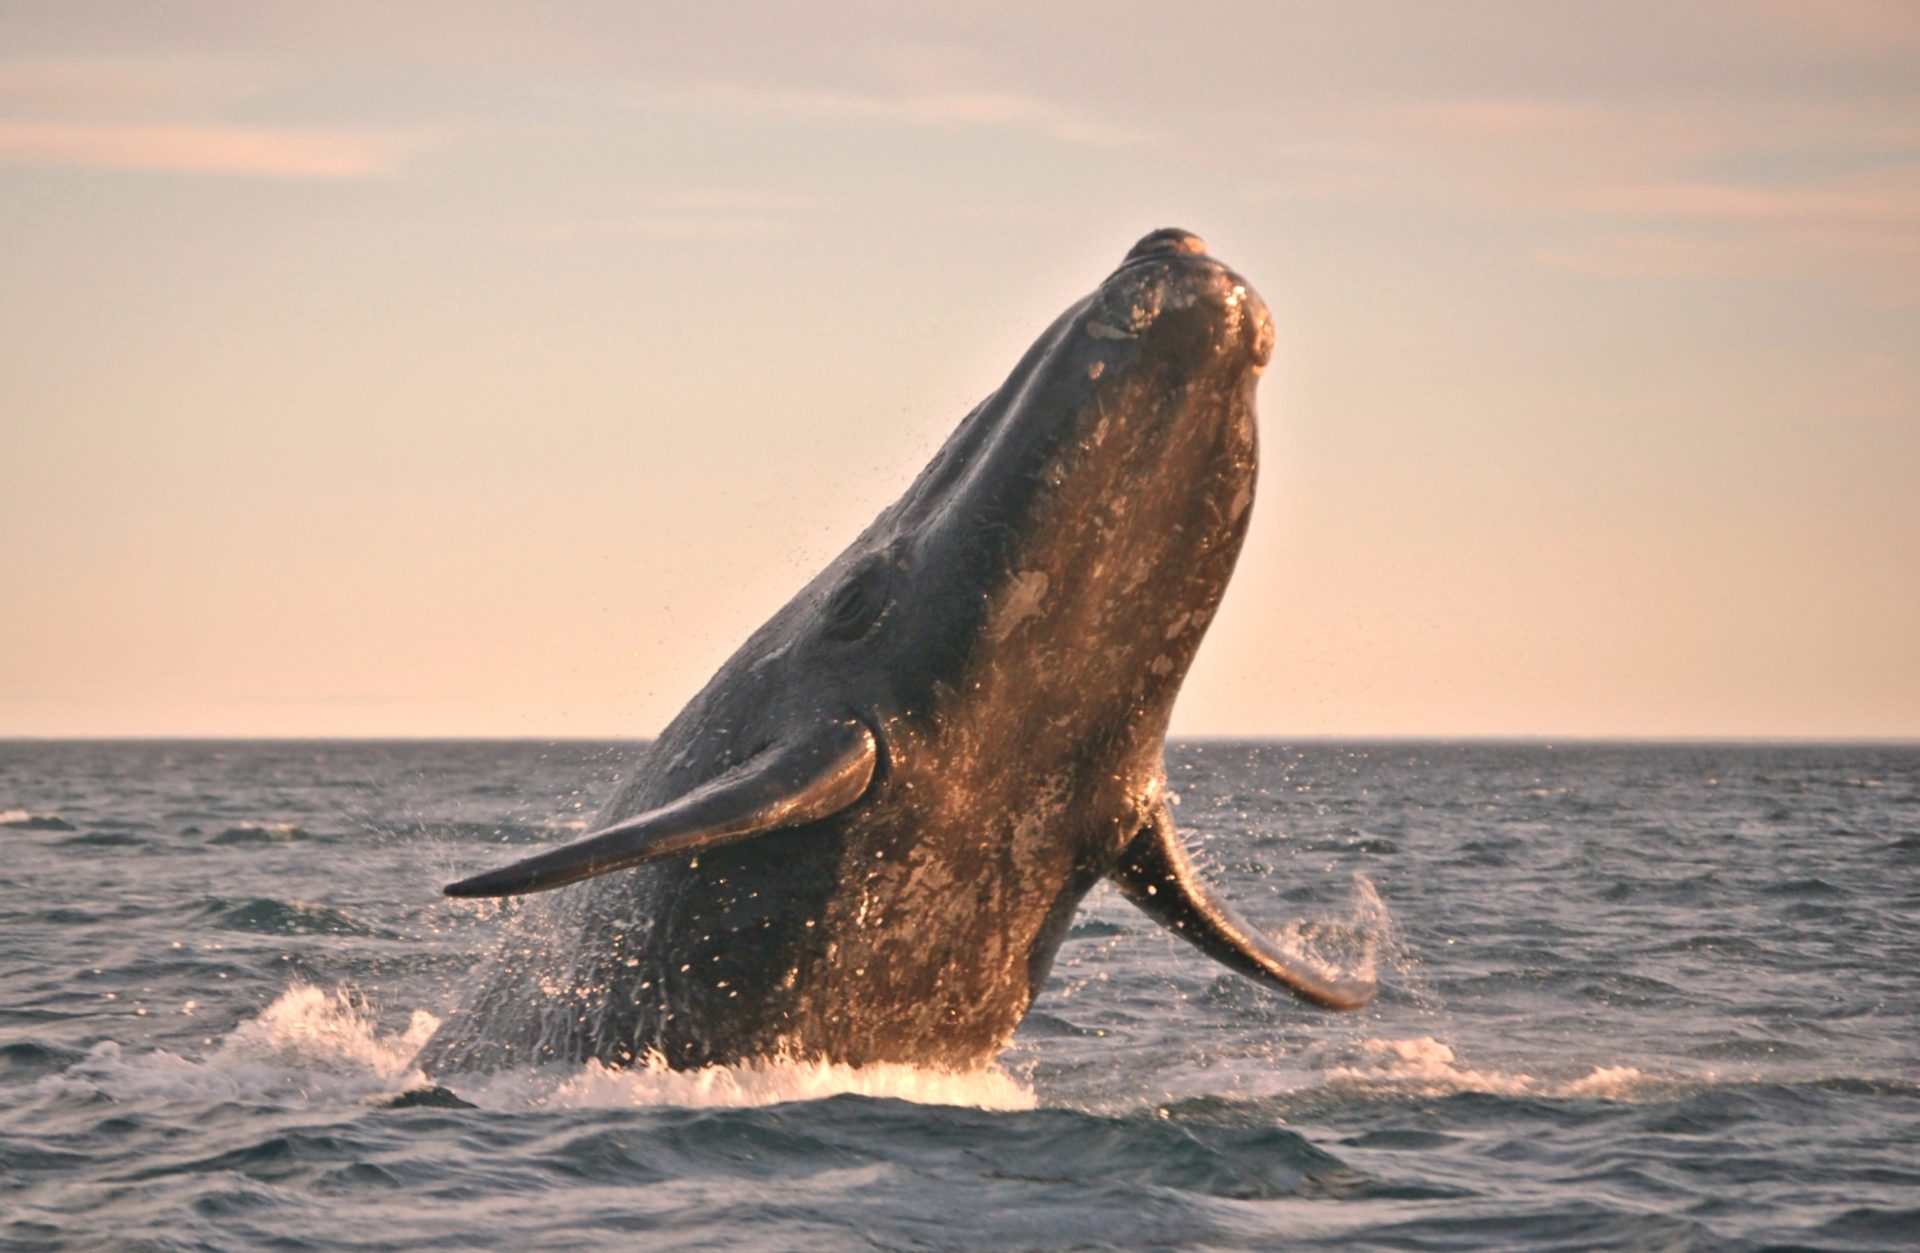 Bitcoin Whale activity picks up ahead of price swing